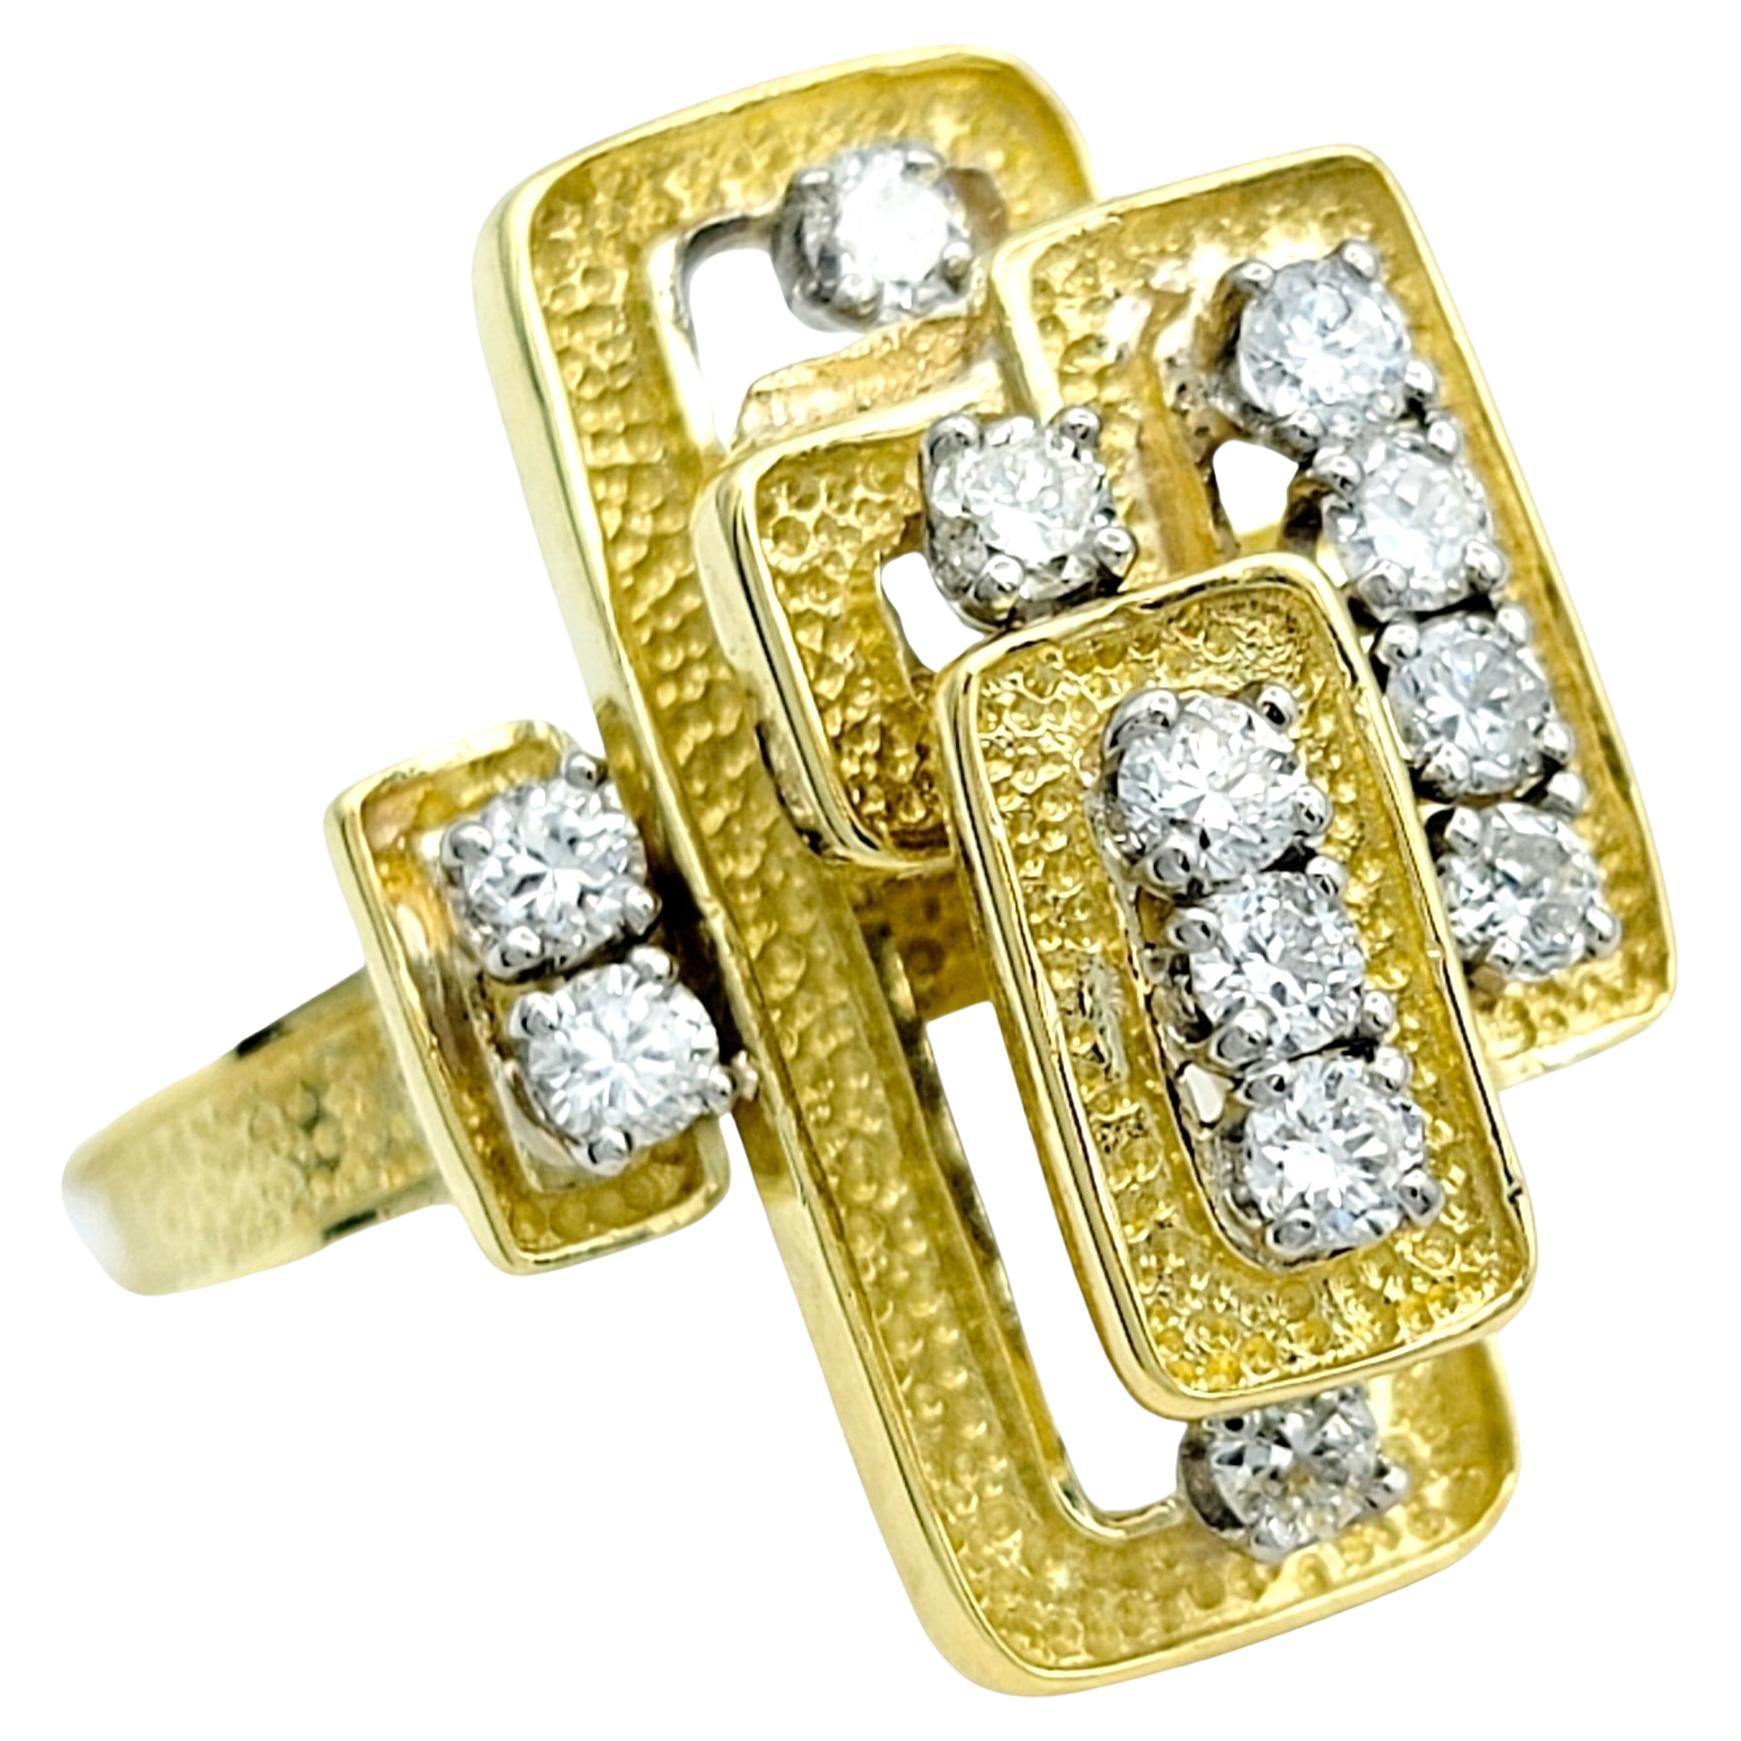 Stacked Geometric Cocktail Ring with Diamonds in Textured 18 Karat Yellow Gold